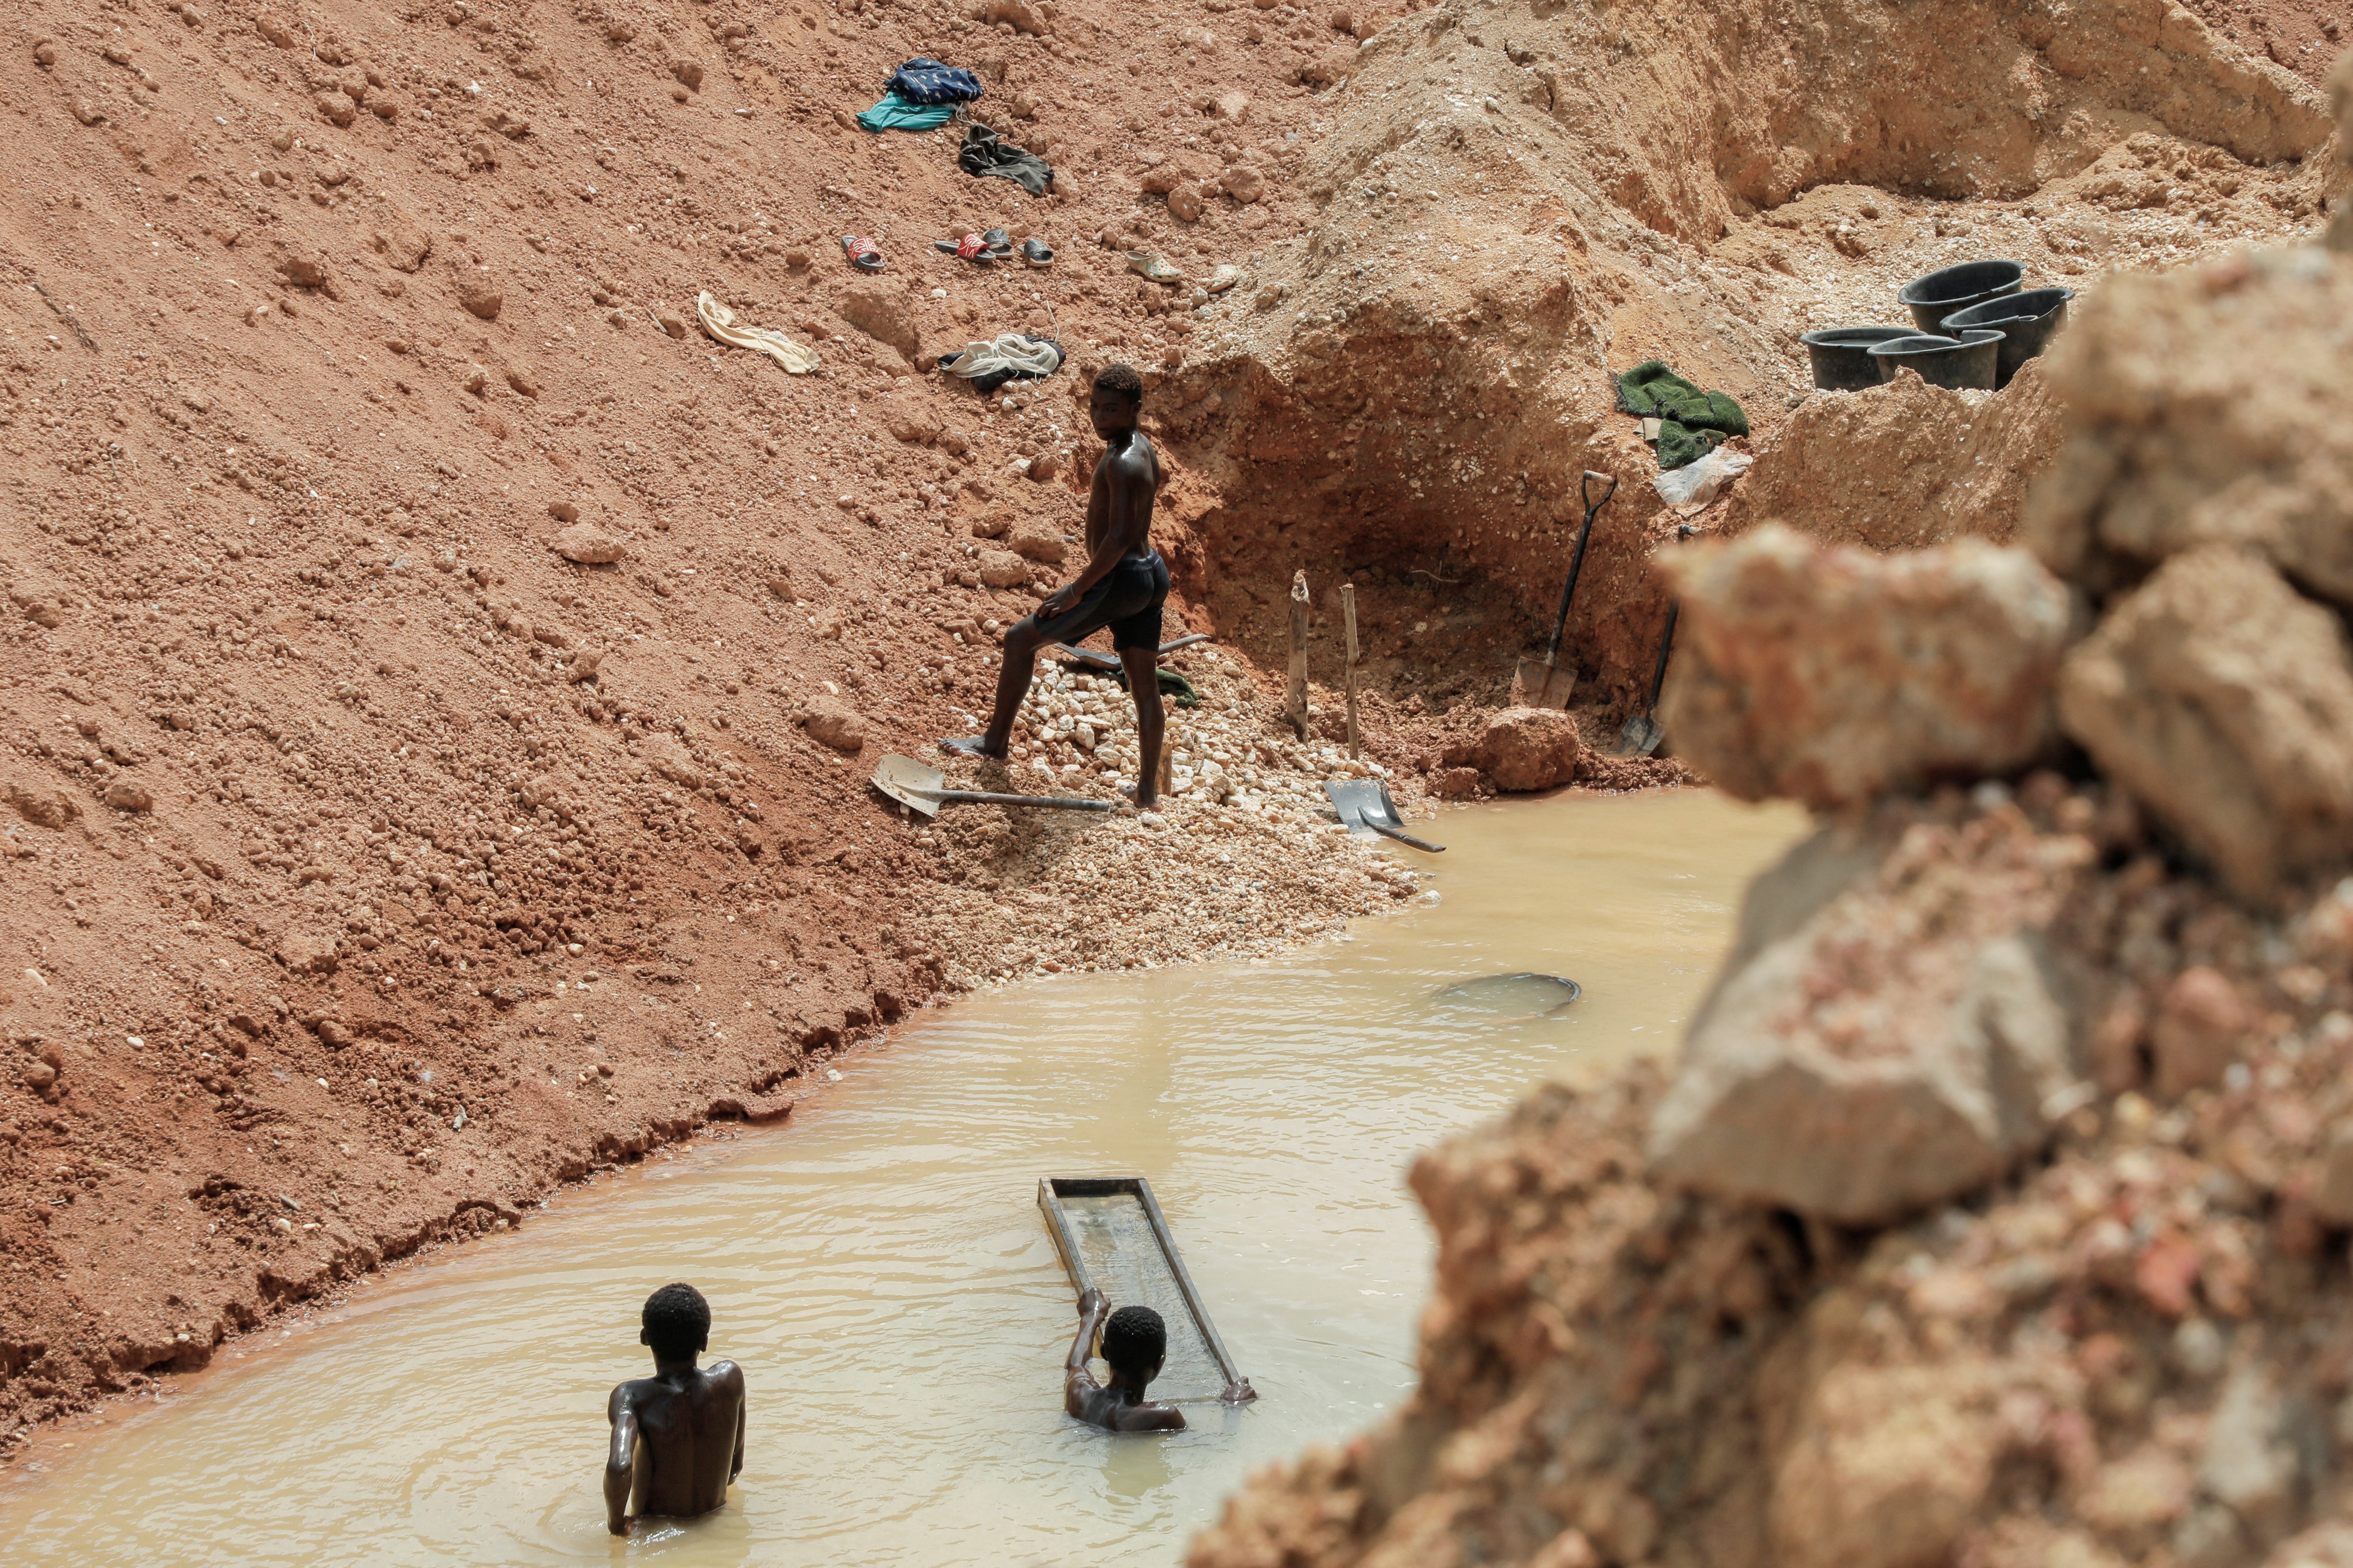 Young boys mine for gold at a mining-ravaged cocoa plantation in the Western region